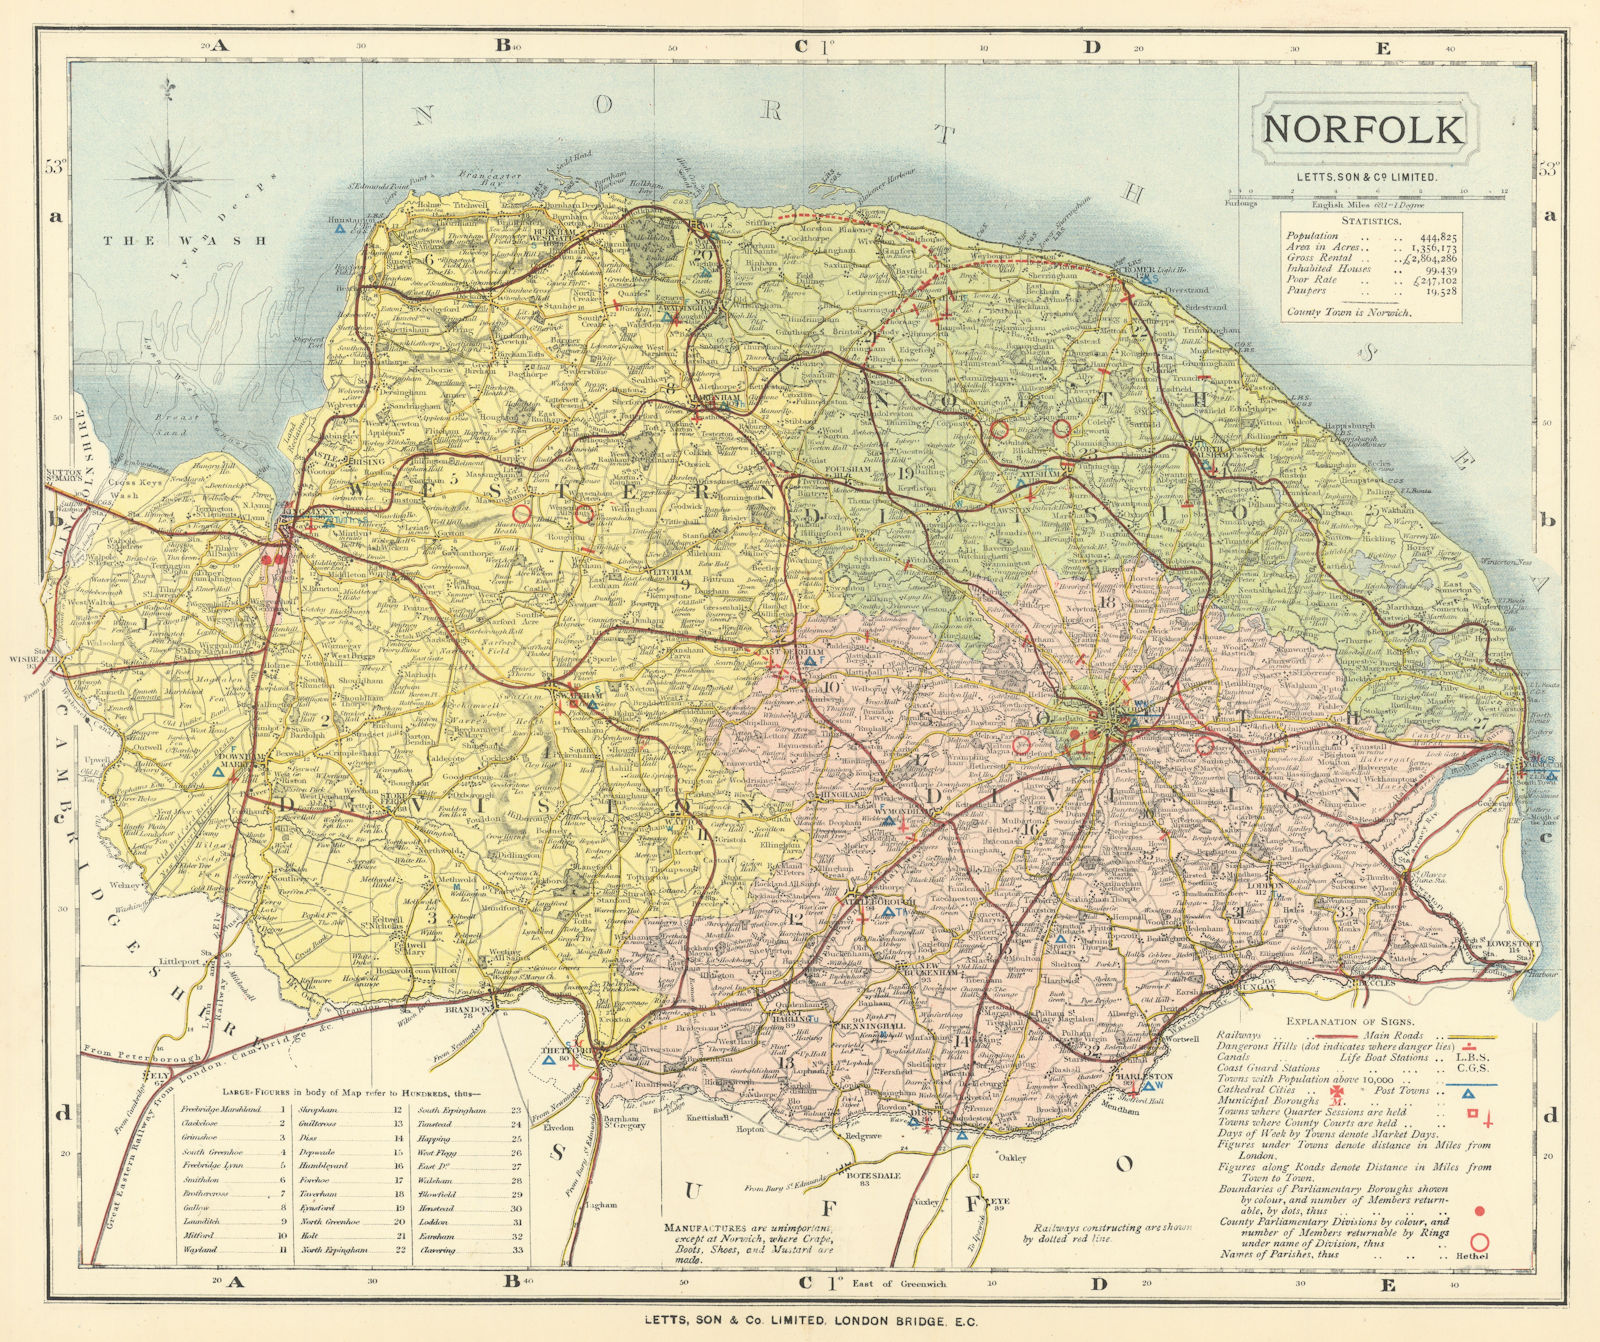 Associate Product Norfolk county map showing Post Towns & Market Days. LETTS 1884 old